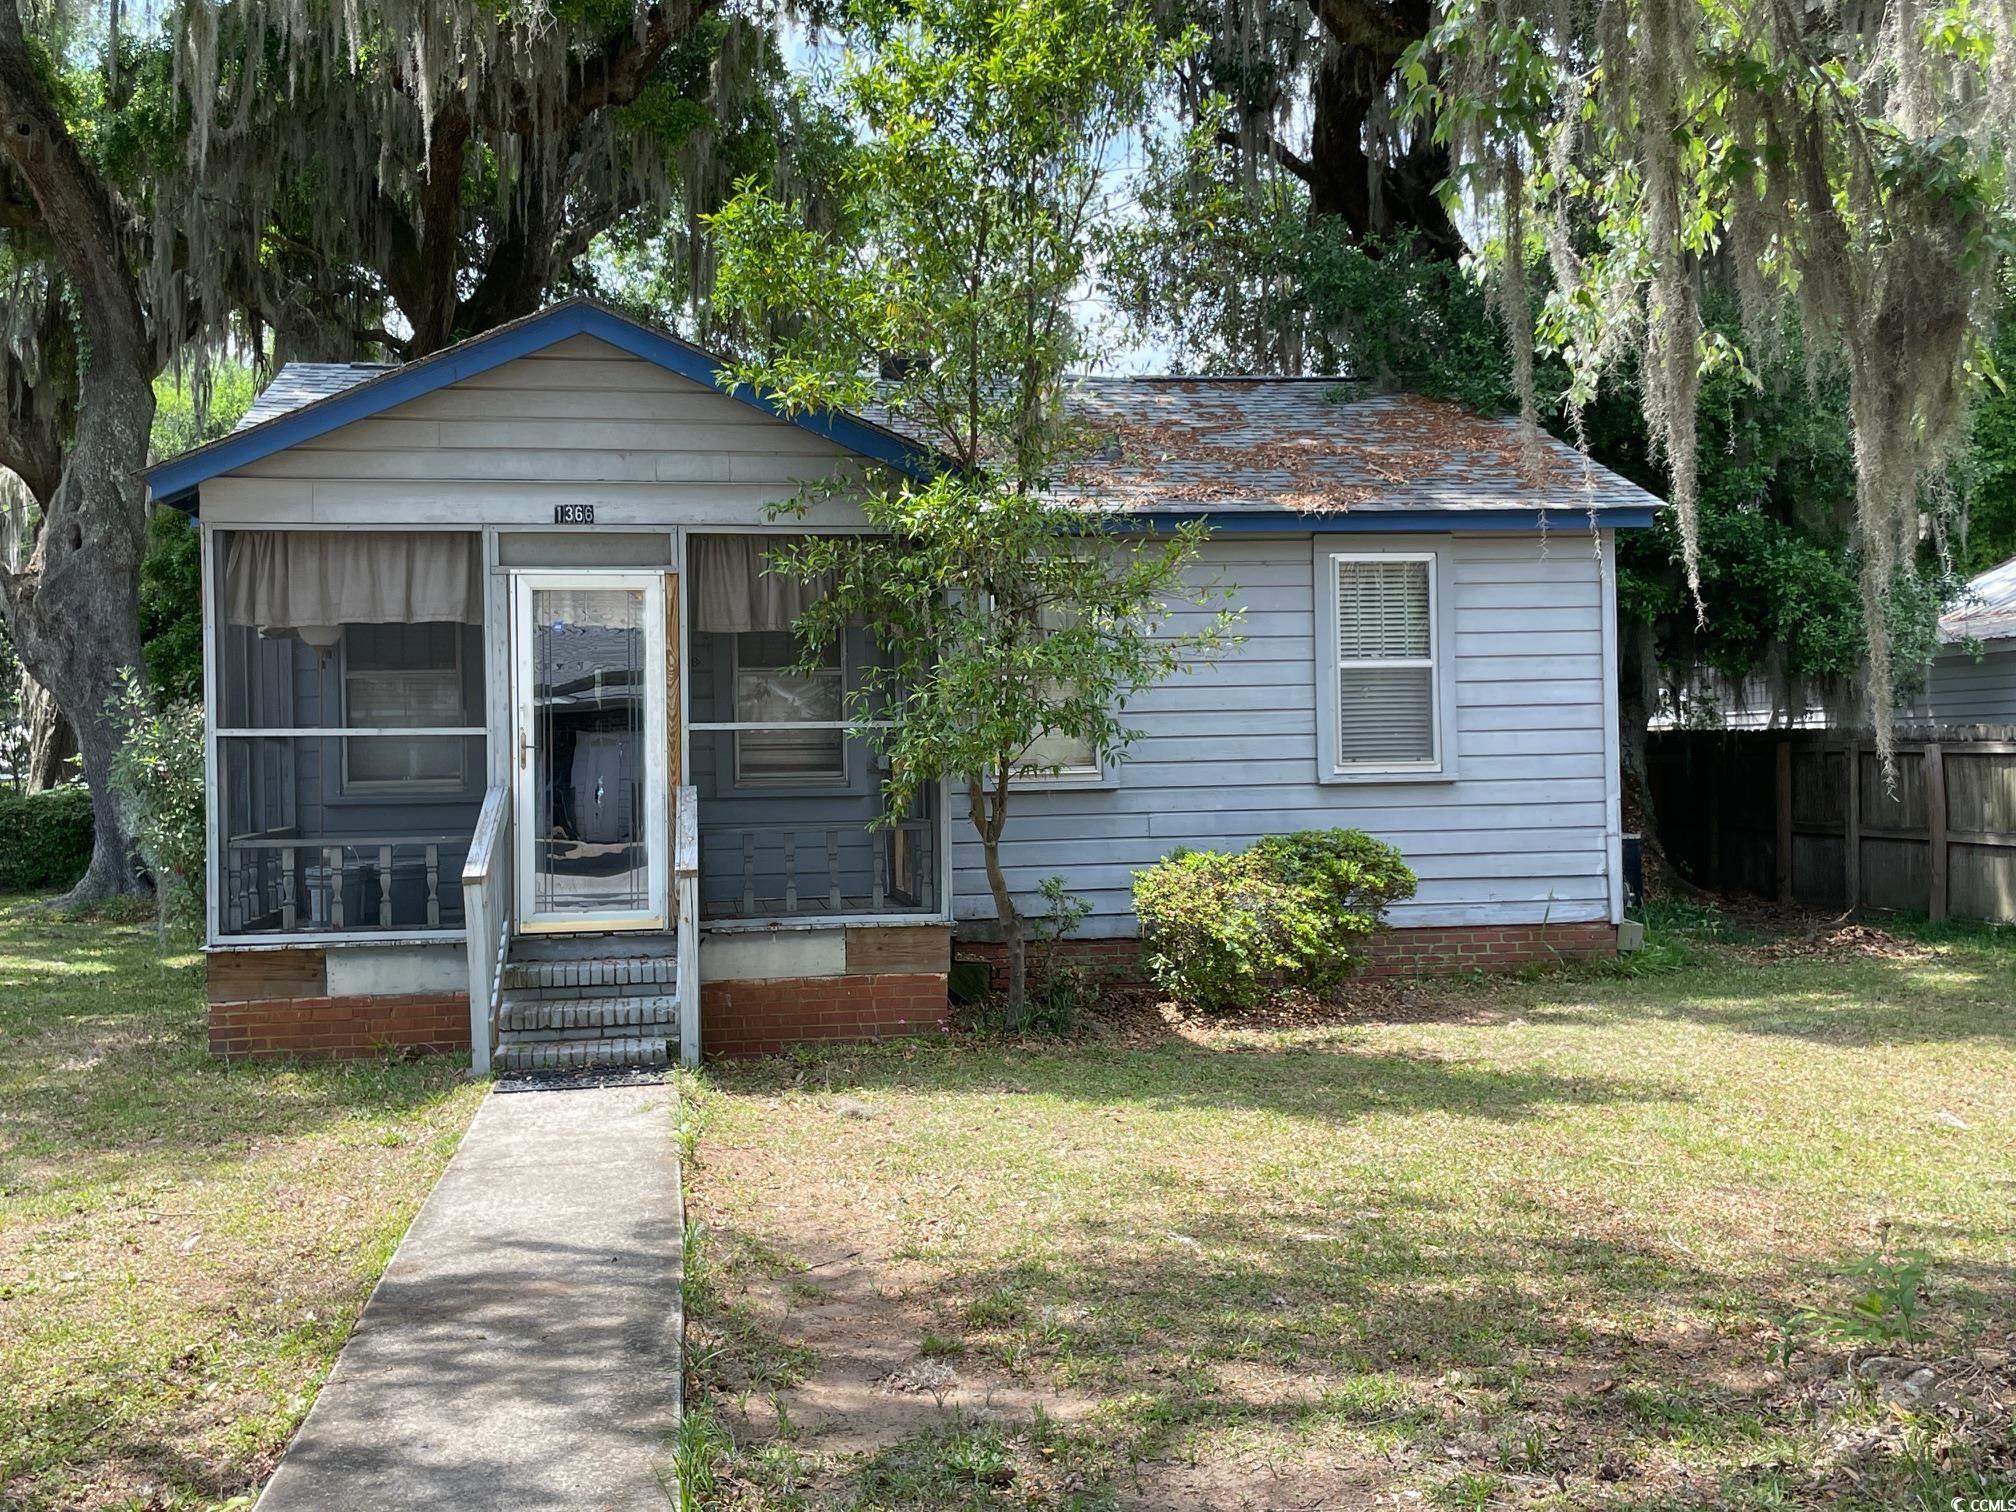 come see our little slice of heaven in georgetown south carolina. this old home just needs the right buyer to come in and make it a happy beach bungalow. no hoa house with bonus room and seperate garage studio, storage building. beautiful live oaks drape this little gem just minutes and steps to water, breaches, downtown georgetown. carpenters dream so much square footage to work with. live in this spacious home while working to make it the way you want it finished.